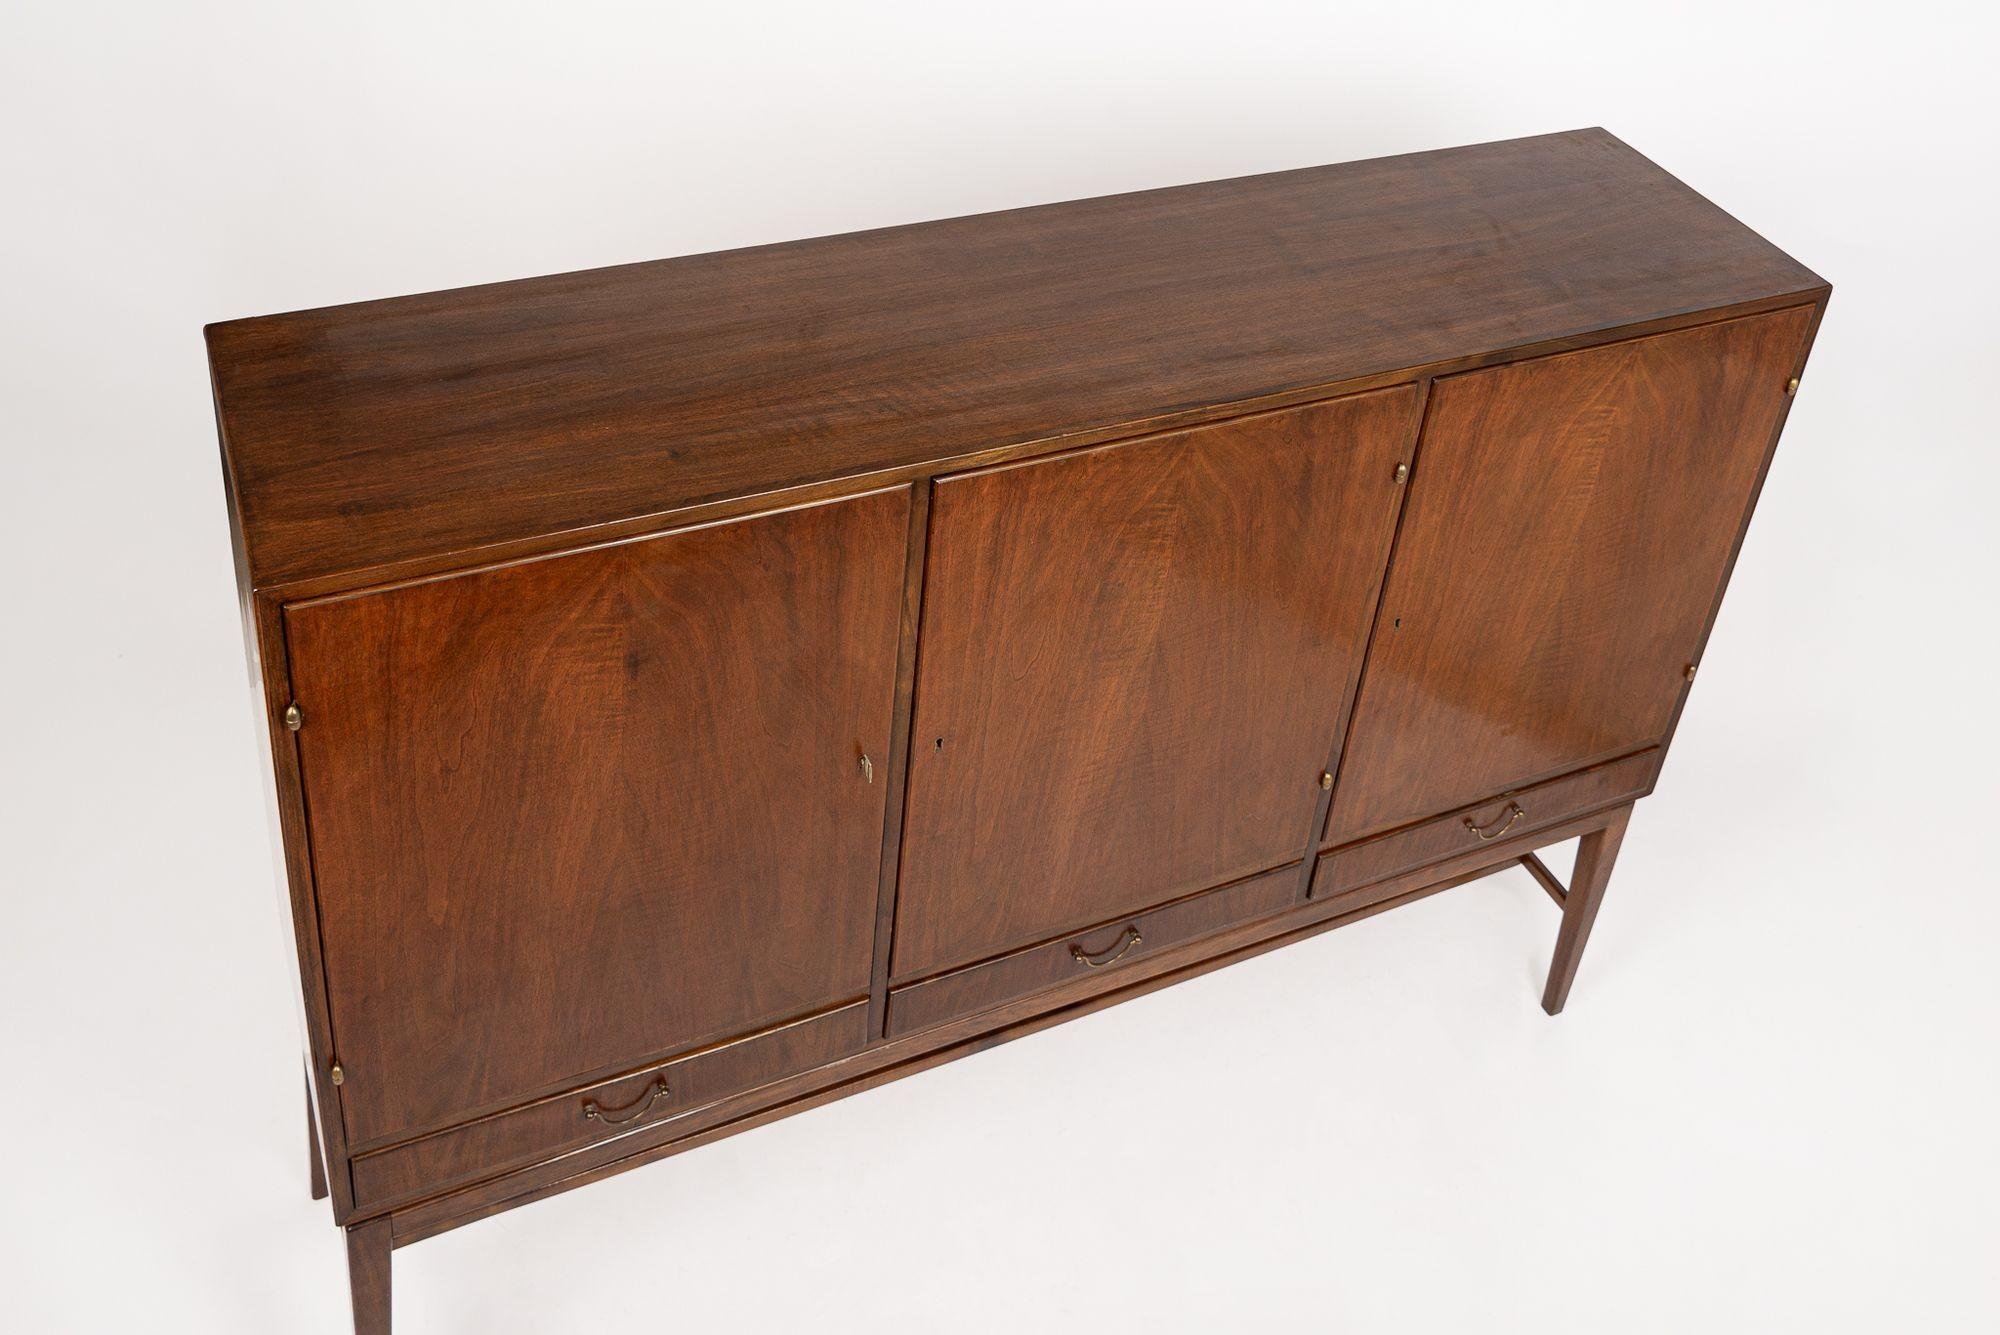 Danish Mid Century Walnut Wood High Cabinet Credenza or Sideboard For Sale